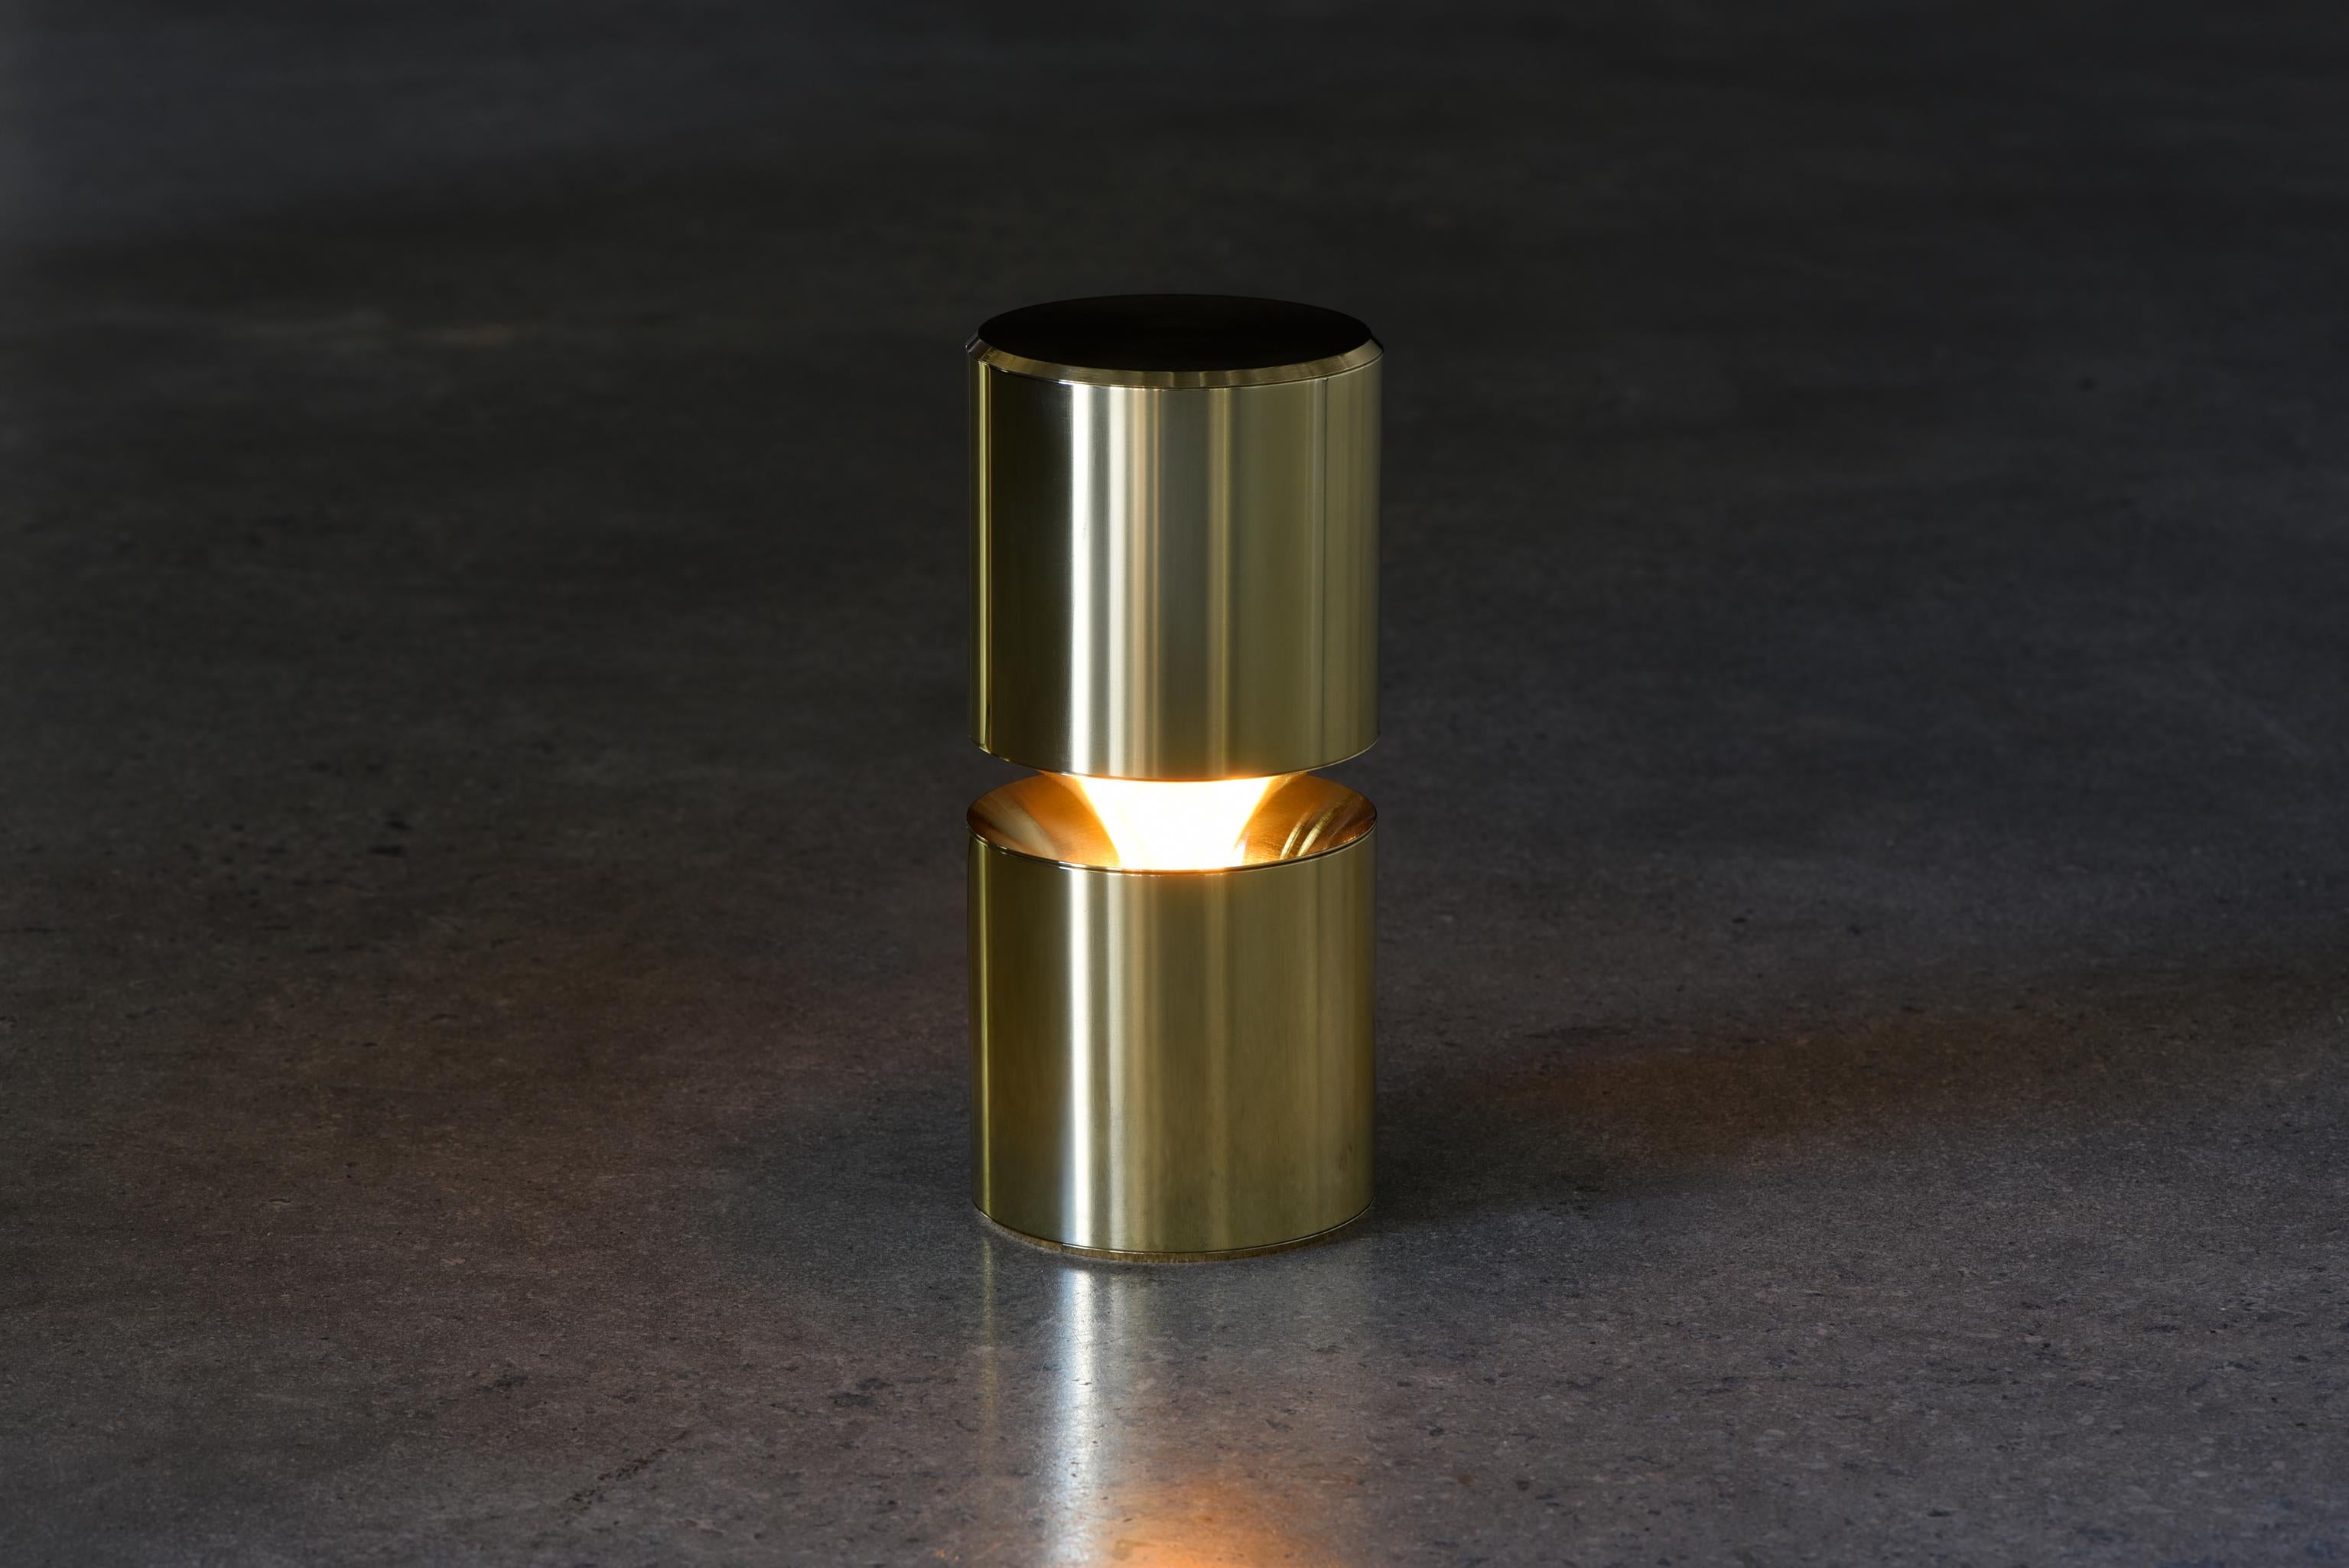 Honne by Callum Campbell
Objects for self collection
Signed and numbered
Dimensions: W 9.5 x H 19- 25 cm 
Materials: Brass, LED
Finish: Polished
Note: 220-240w Australian electrical transformer provided

It is at times difficult to understand,